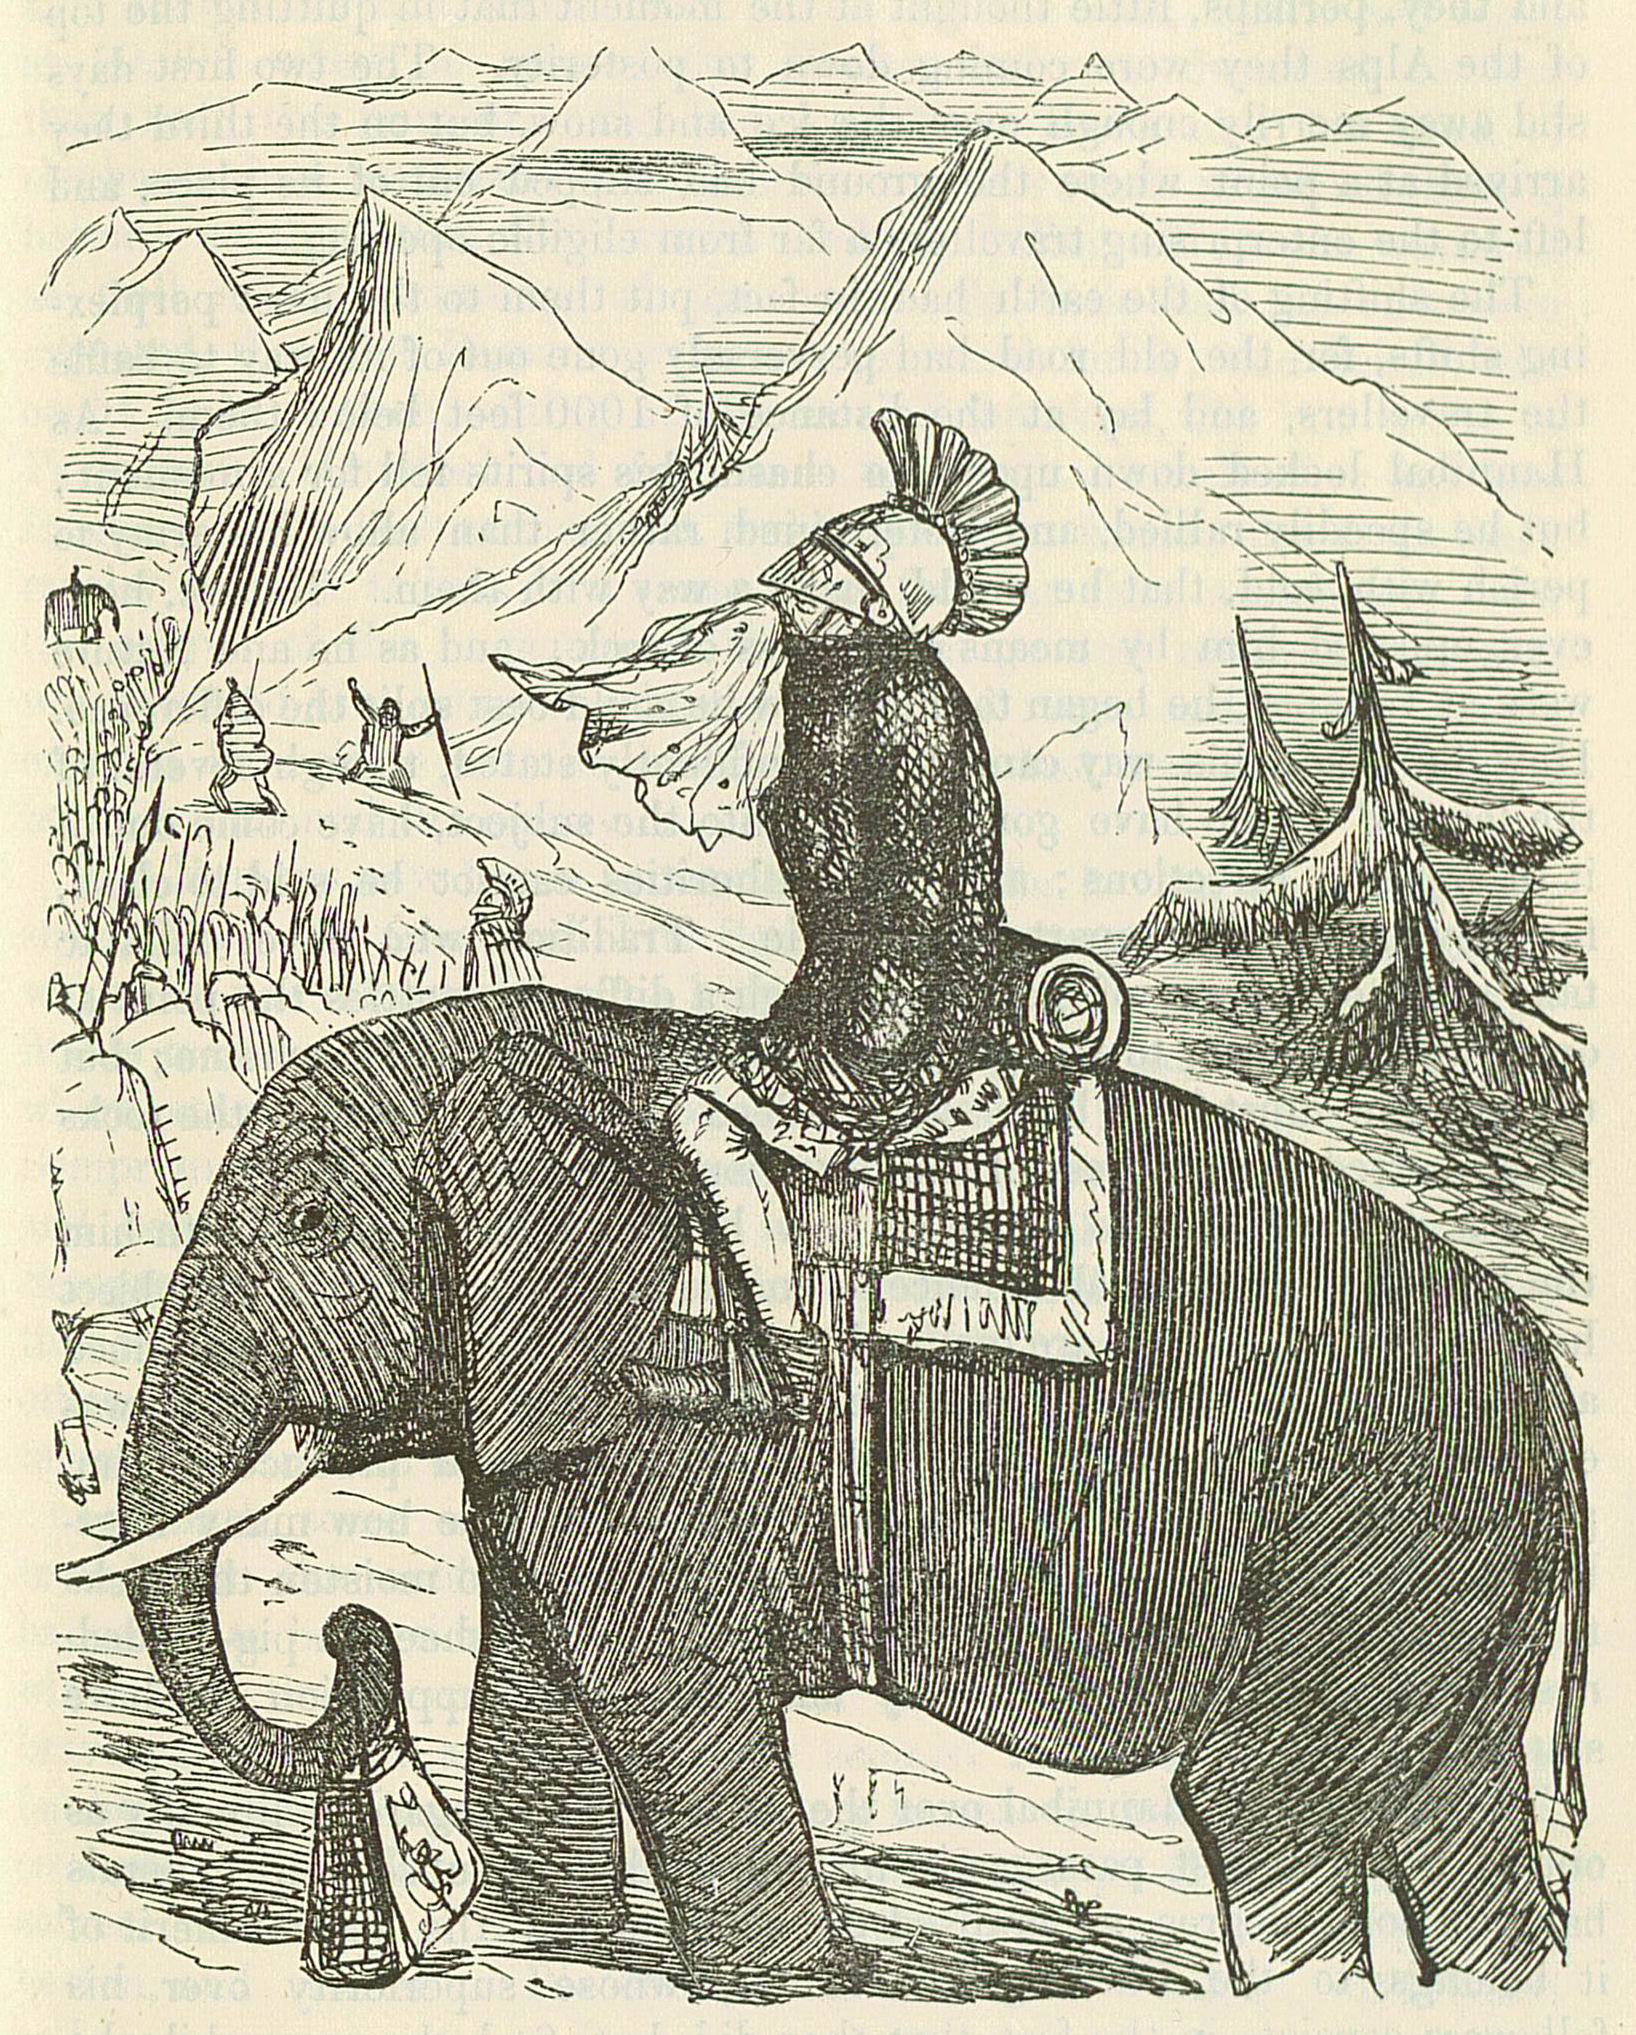 Hannibal crossing the alps on an elephant - Comic History of Rome